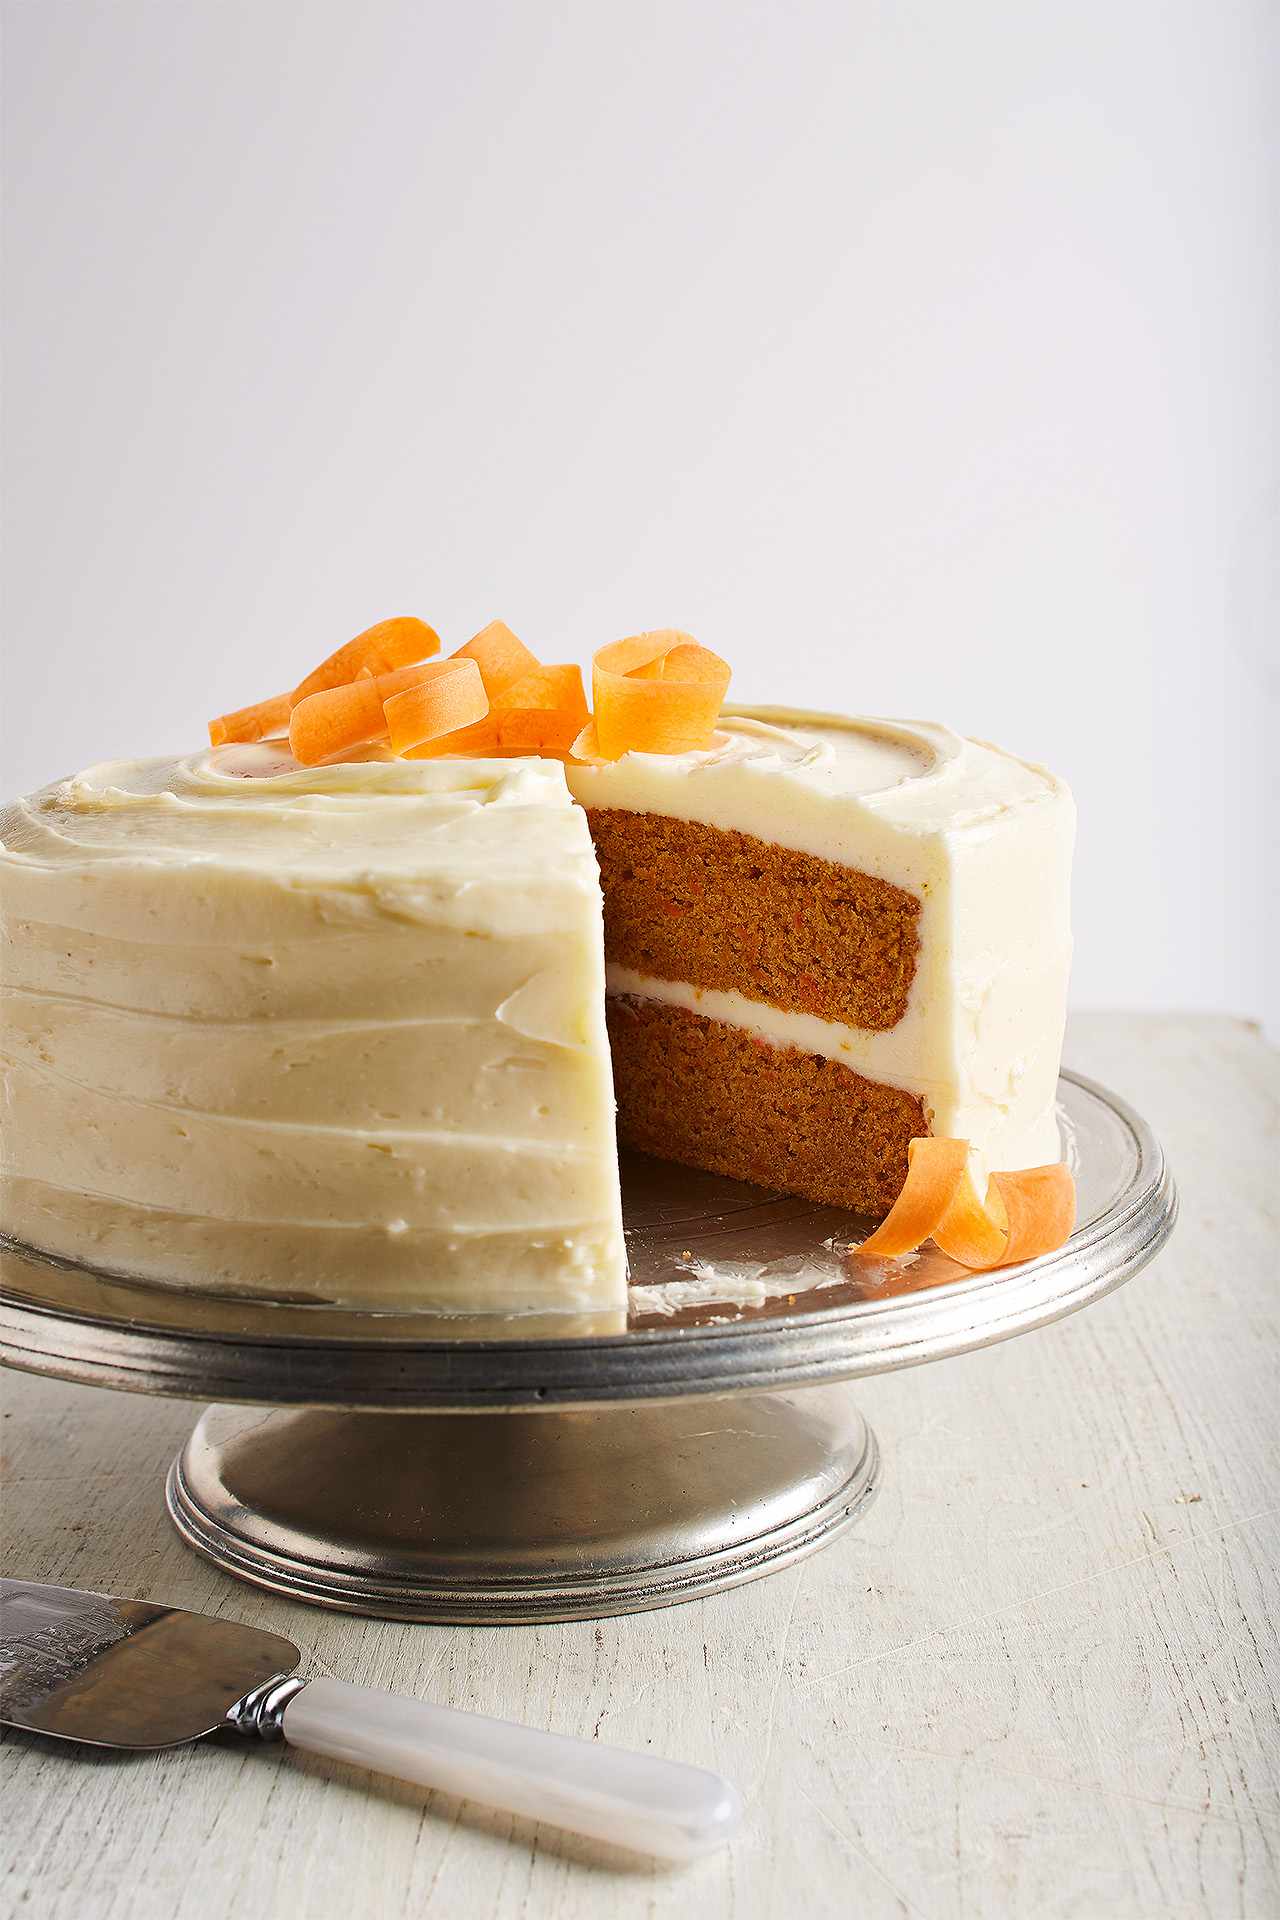 Carrot Cake Recipe on a Silver Cake stand with a slice cut out. Carrot ribbons on top.